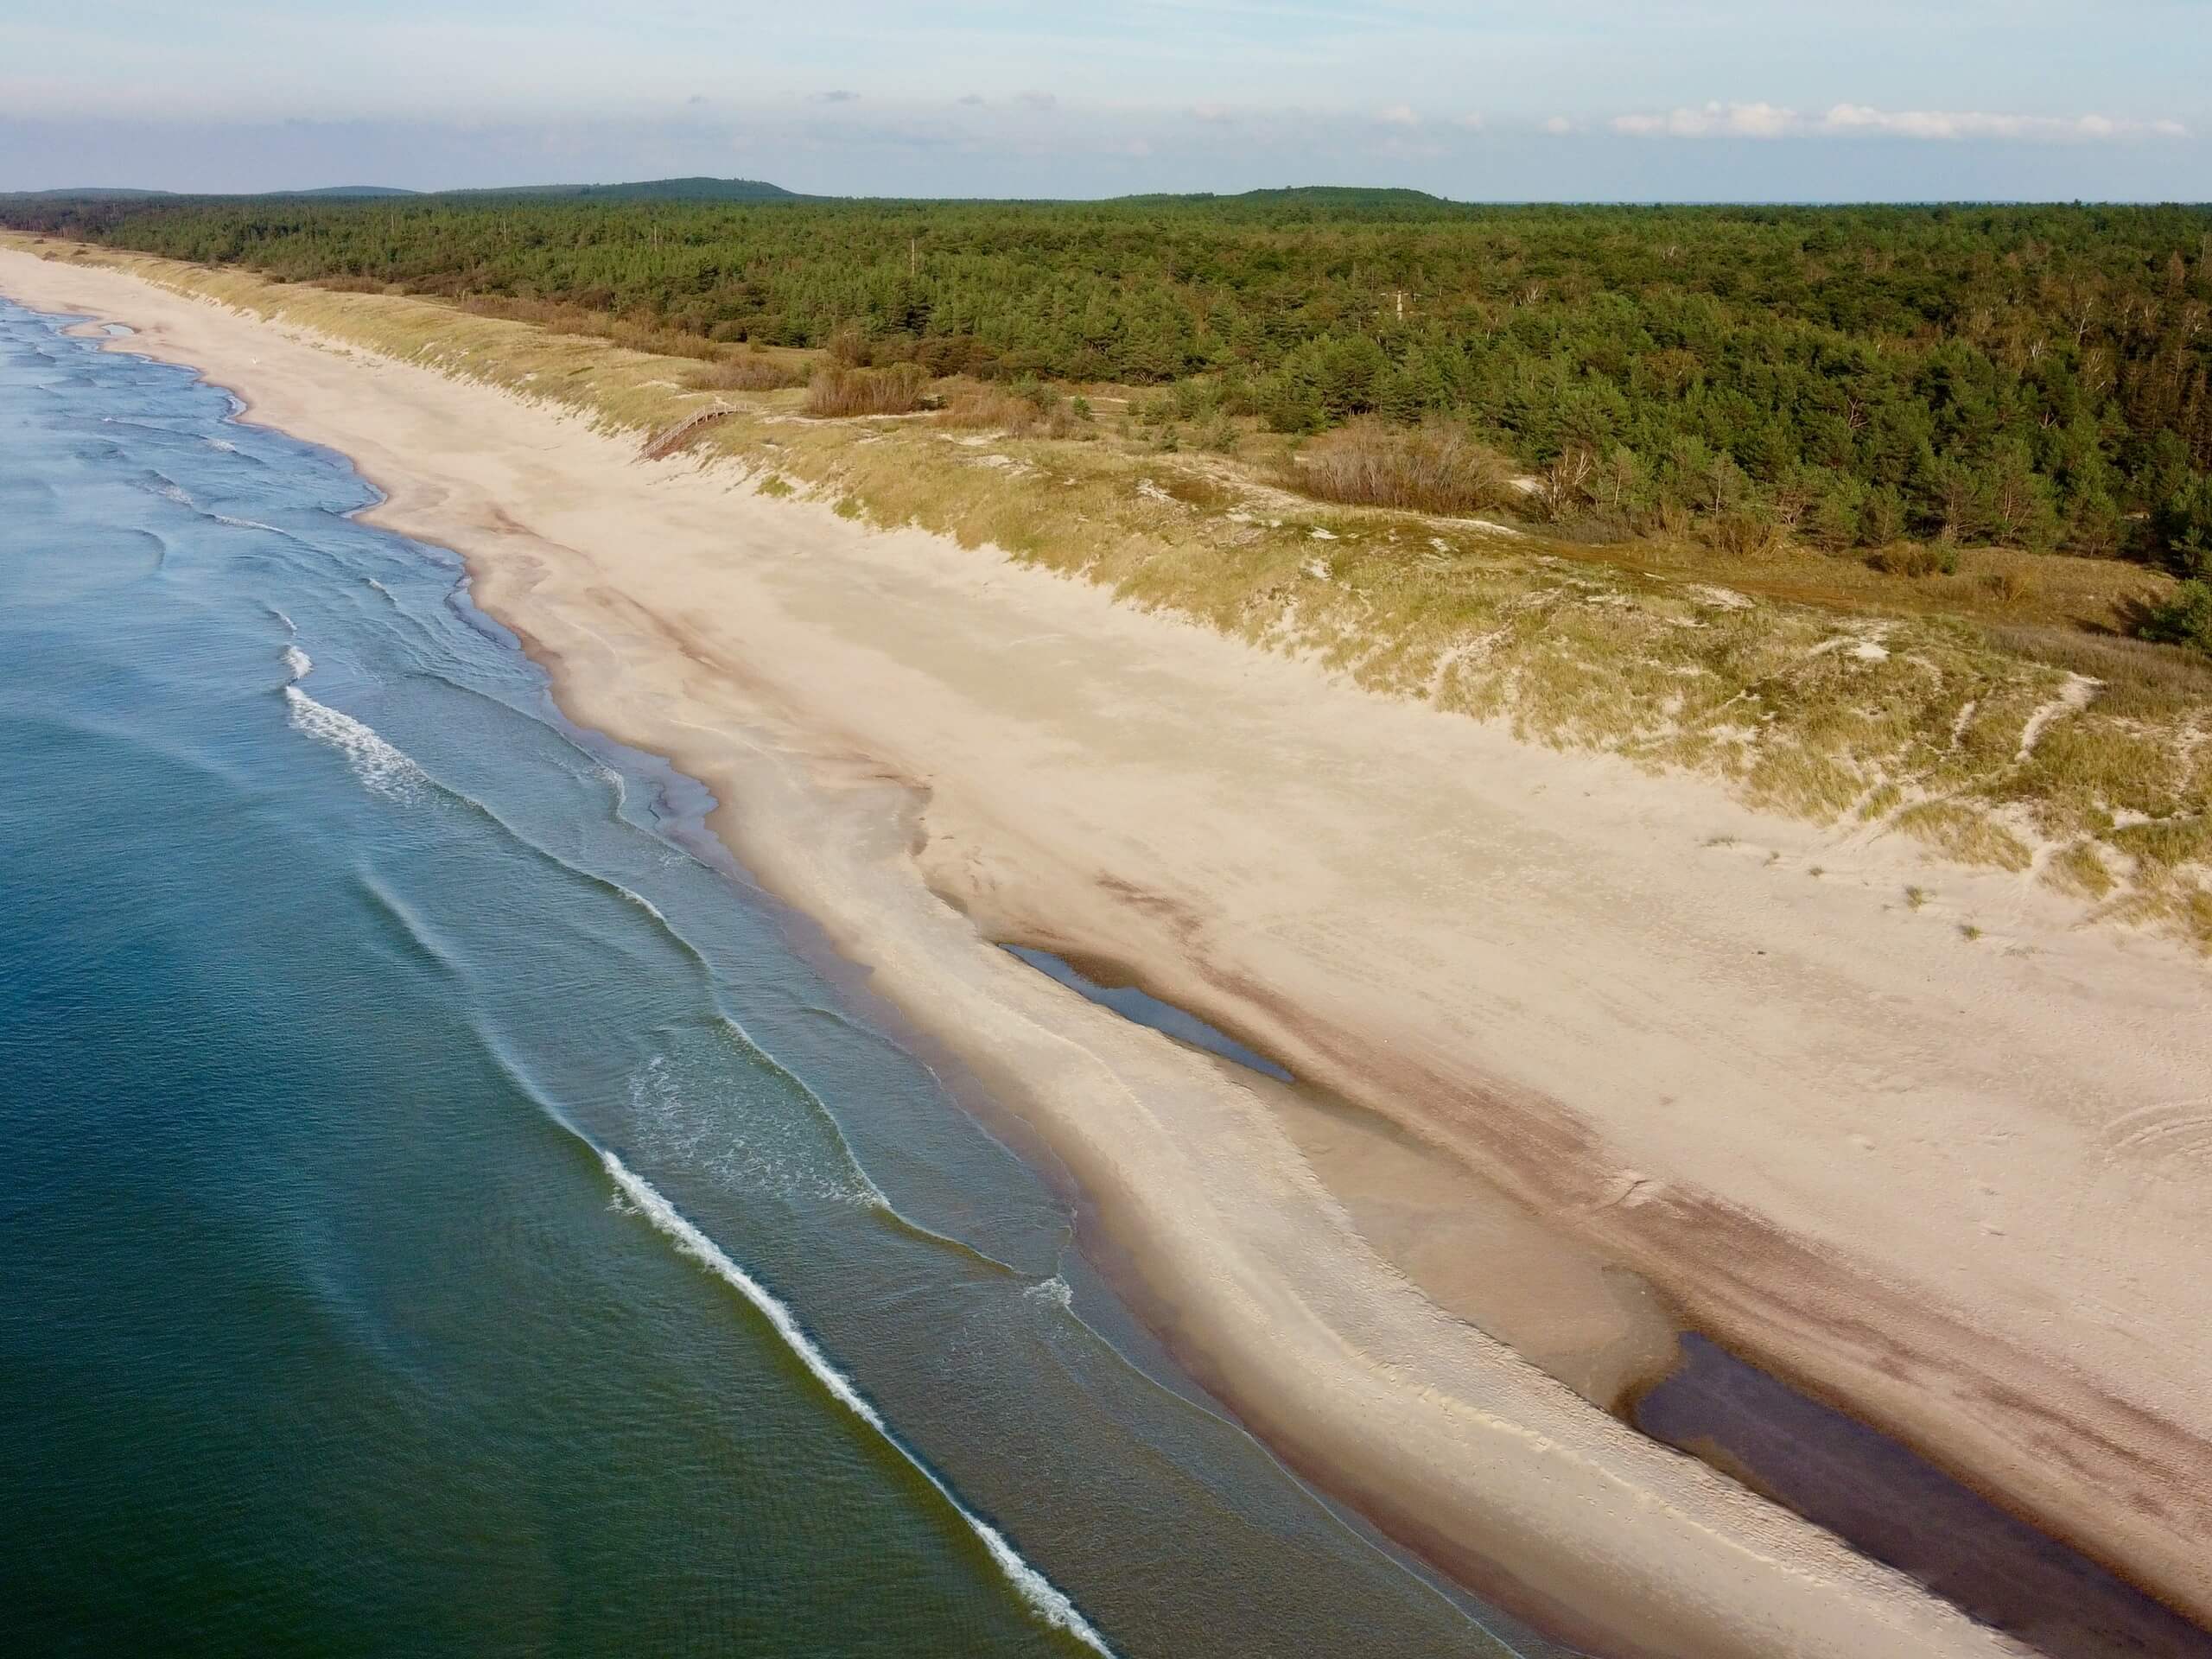 Curonian Split beach as seen from the above